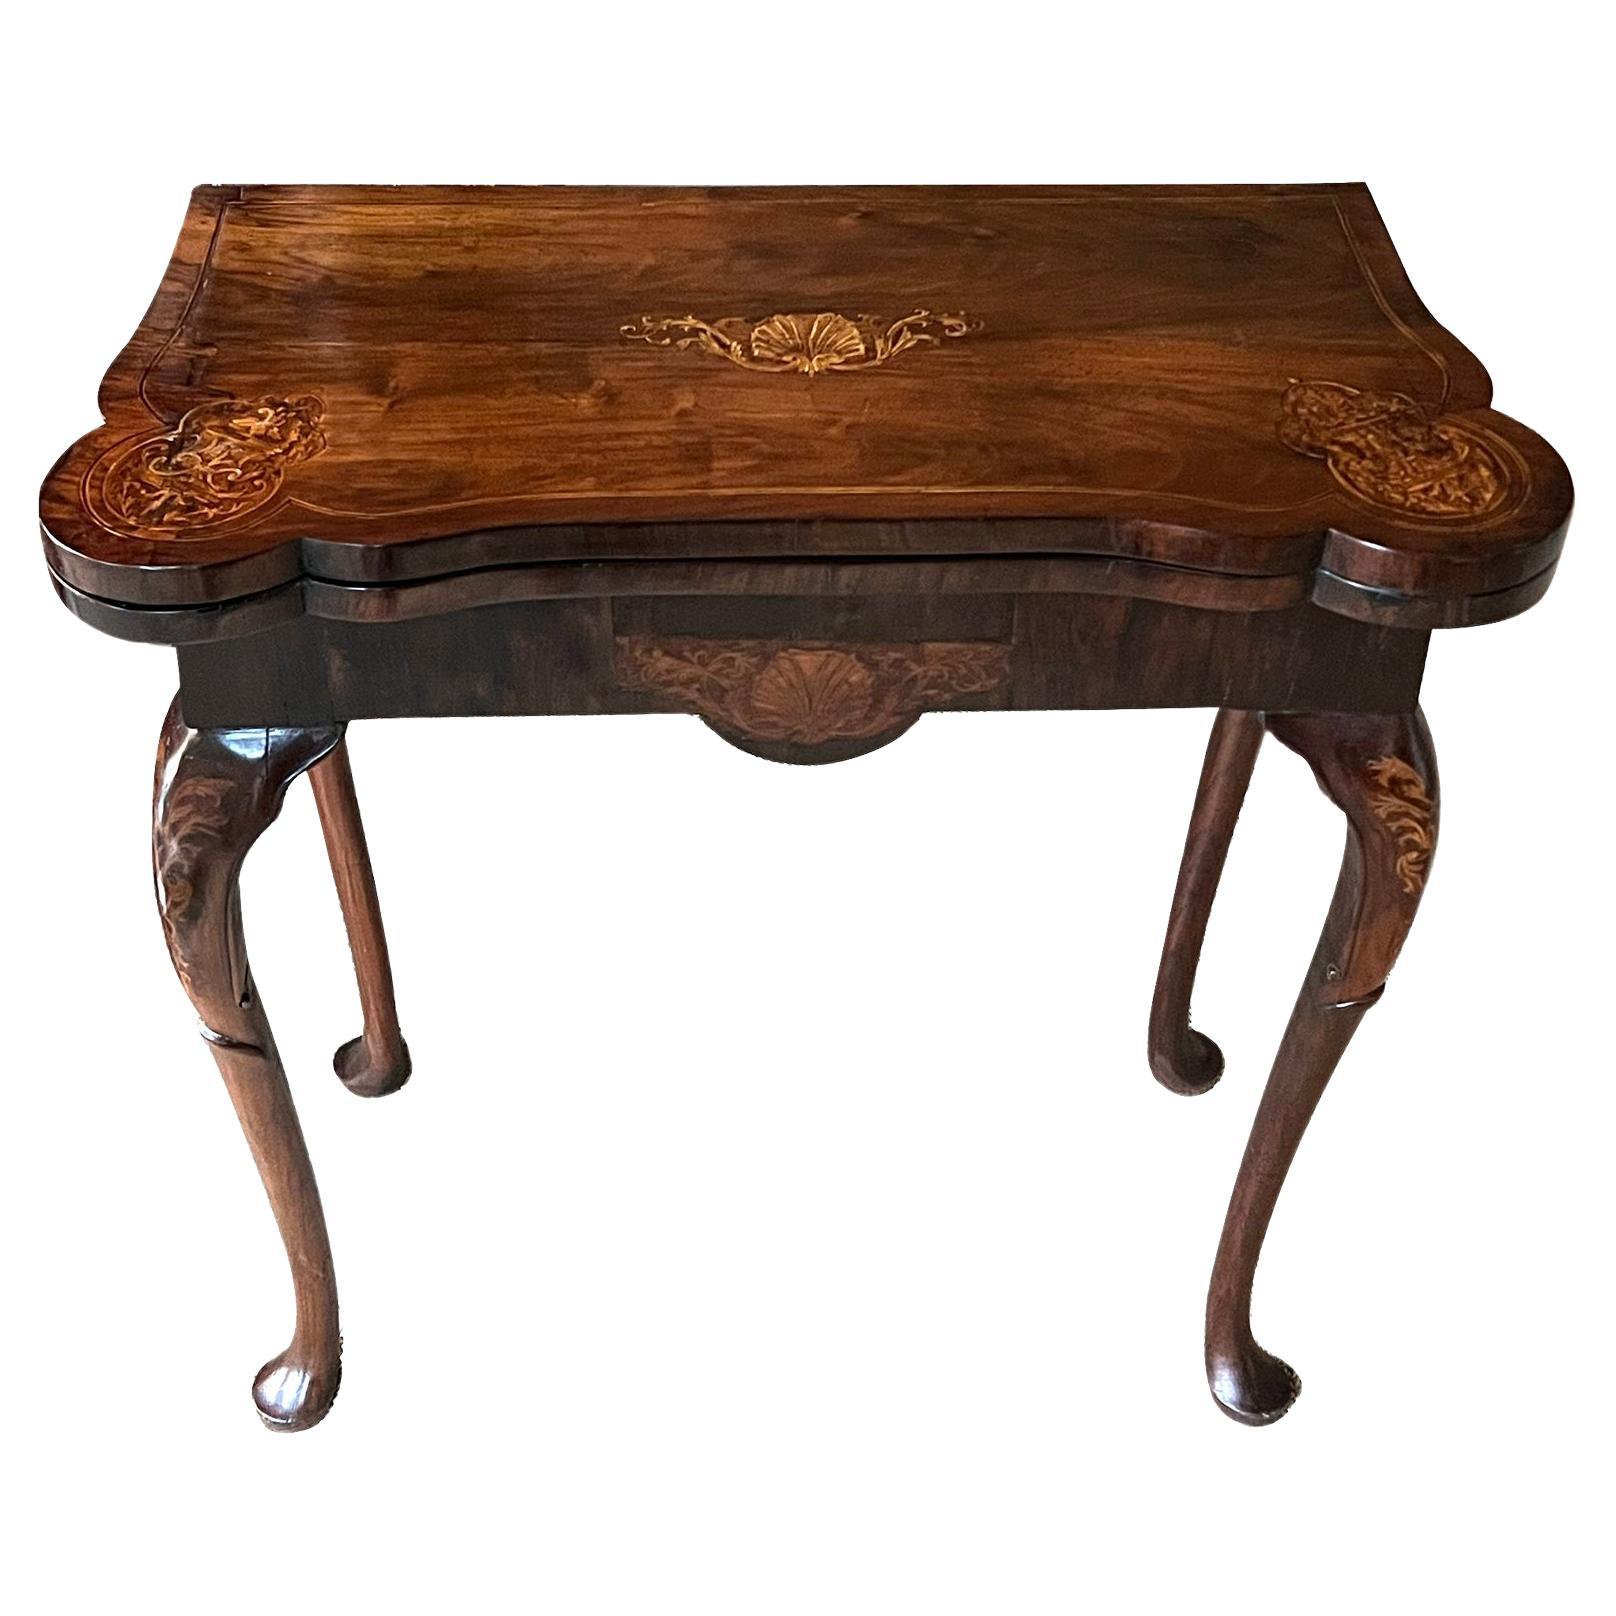 A Queen Anne Period Carved Walnut Lift-top Gate Leg Games/Card Table For Sale